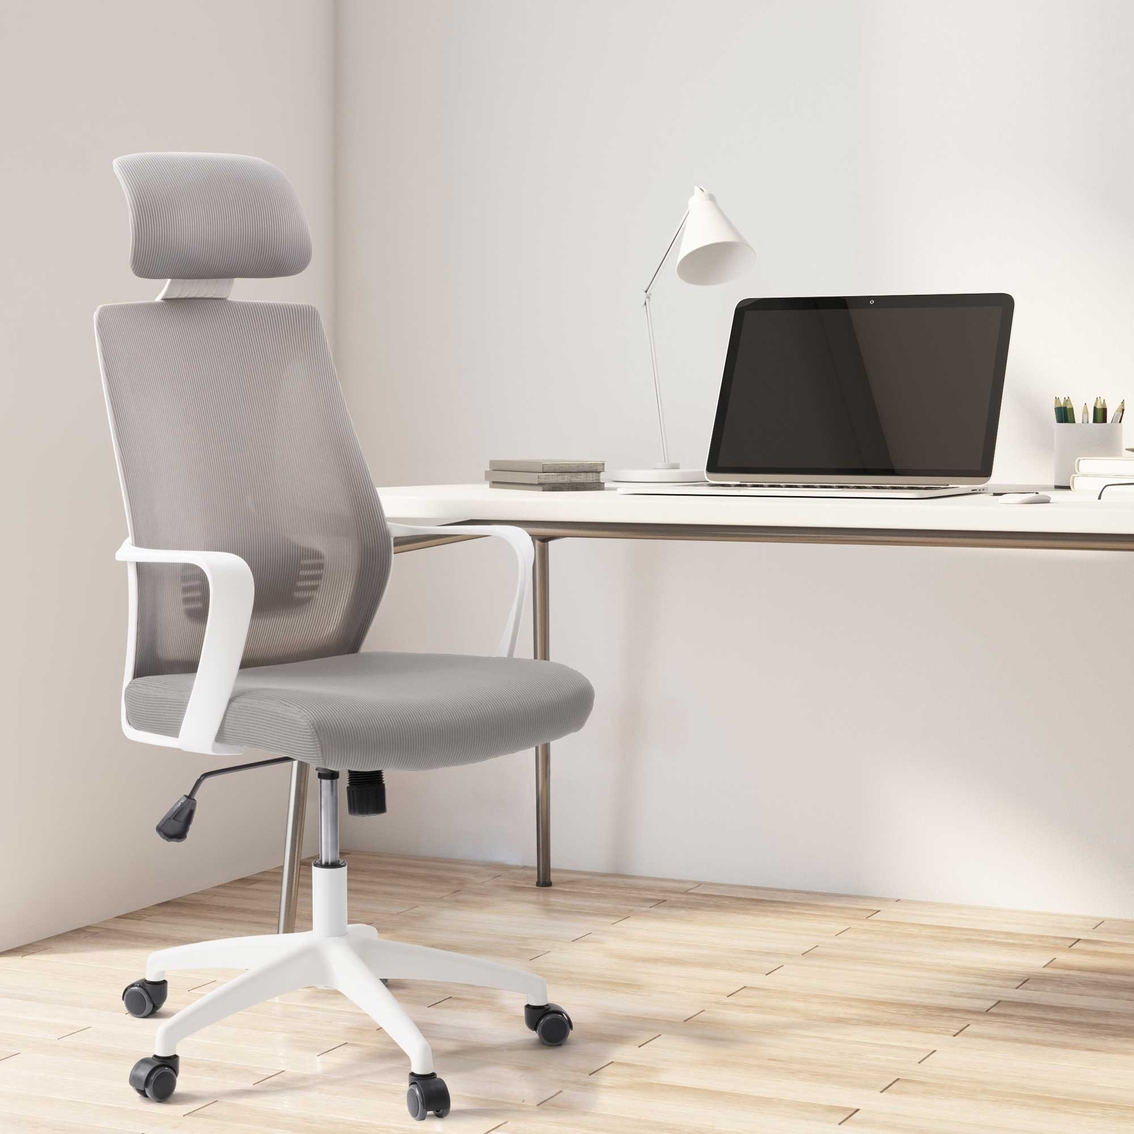 CorLiving Workspace Mesh Back Office Chair - Image 7 of 7